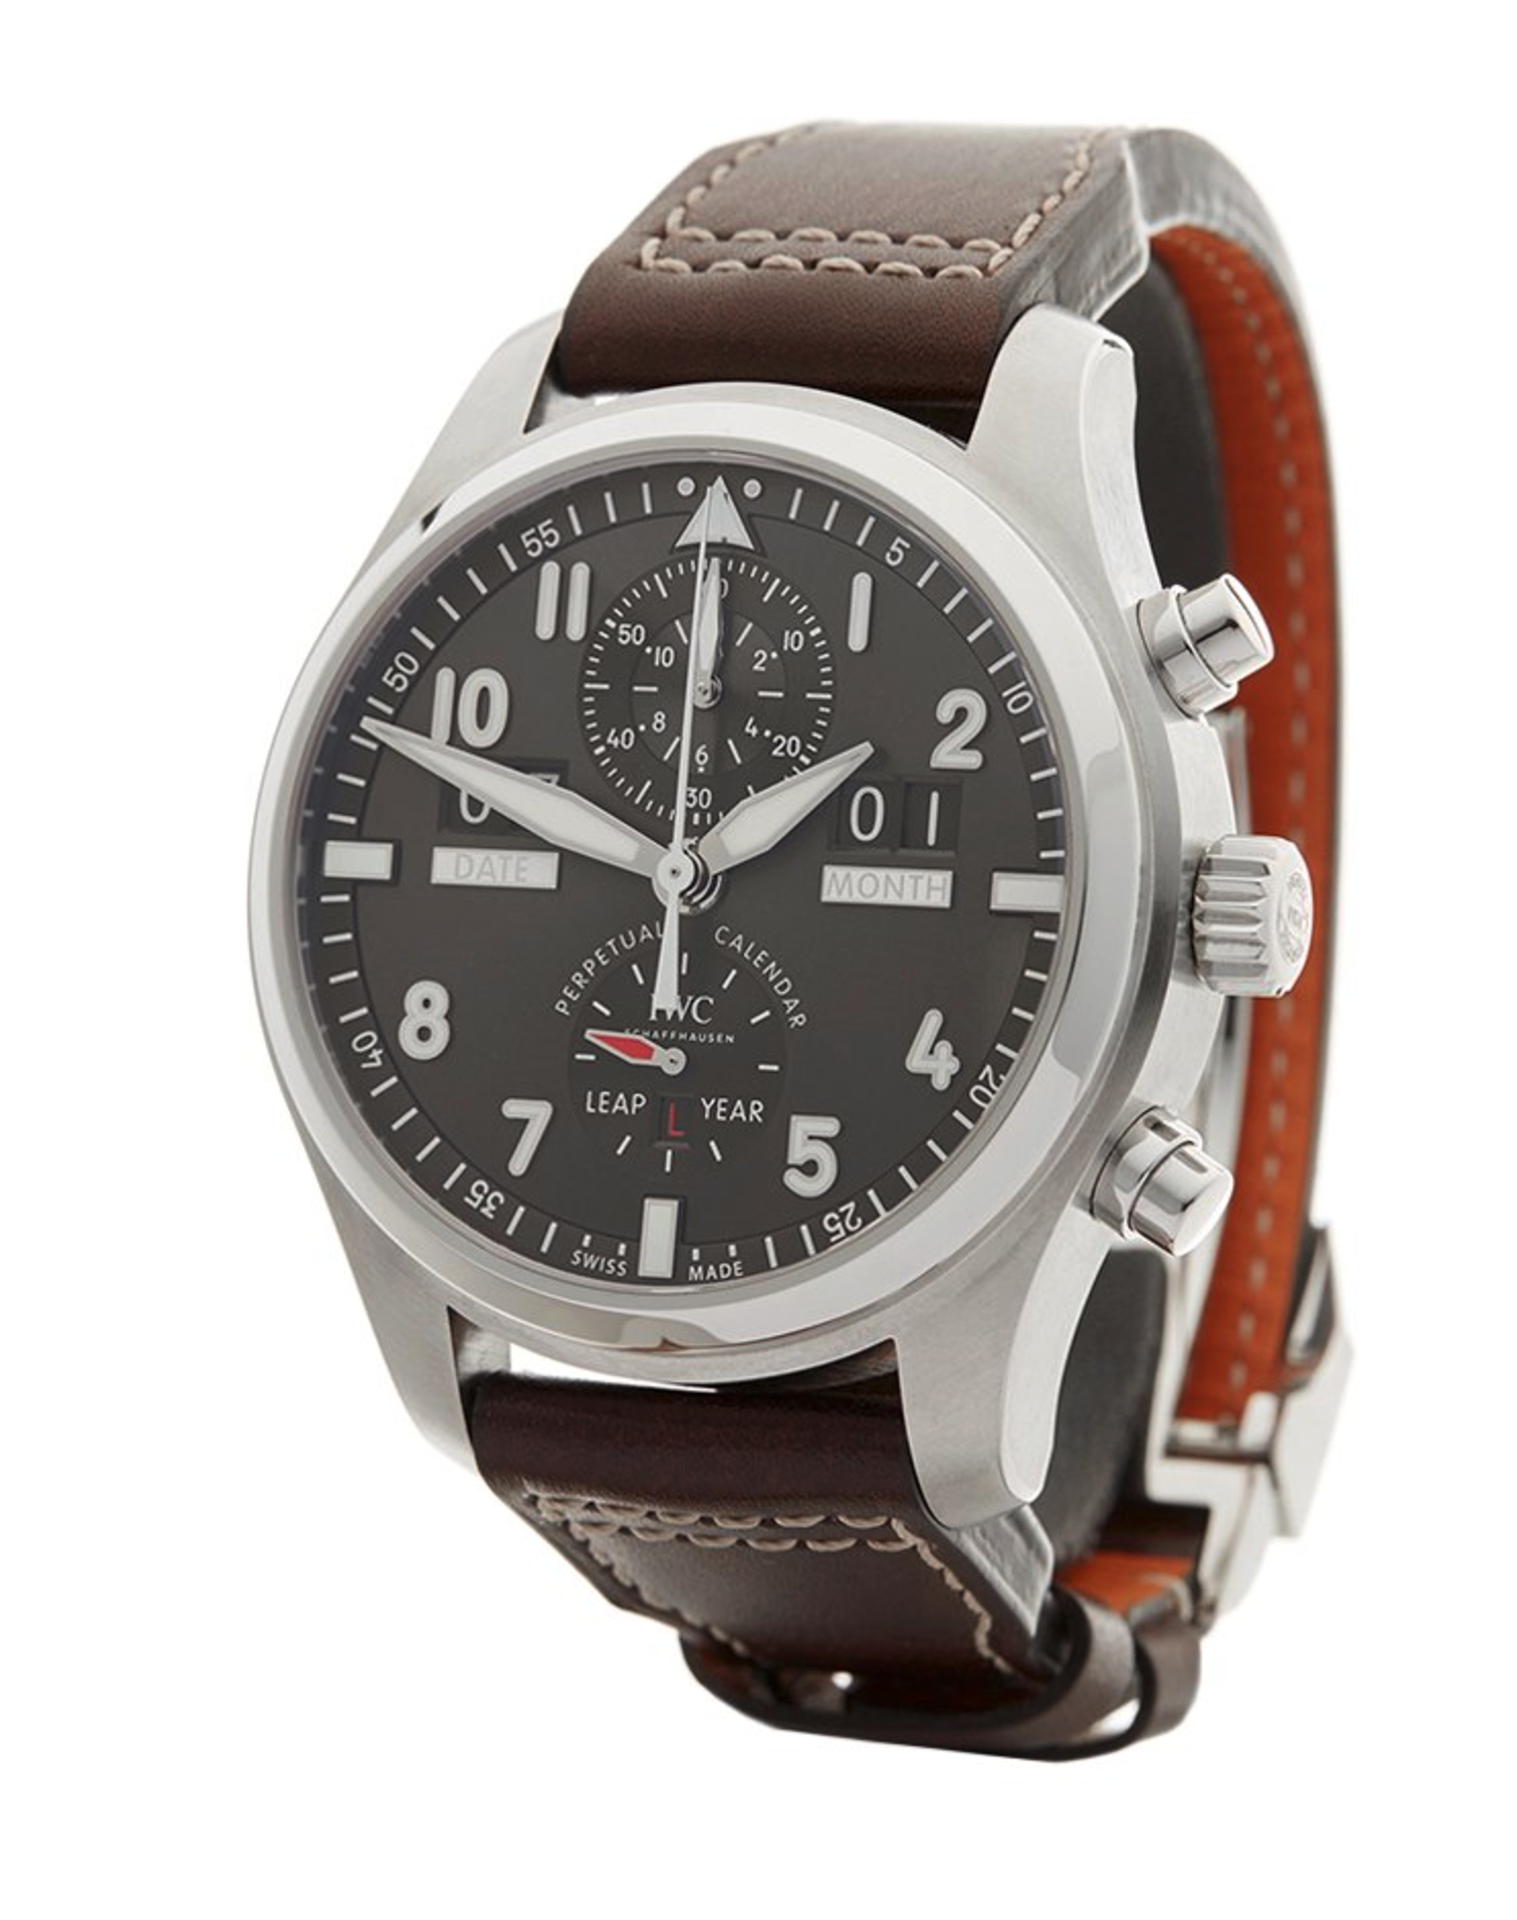 IWC Pilot's Perpetual Calendar 46mm Stainless Steel - IW379108 - Image 6 of 8